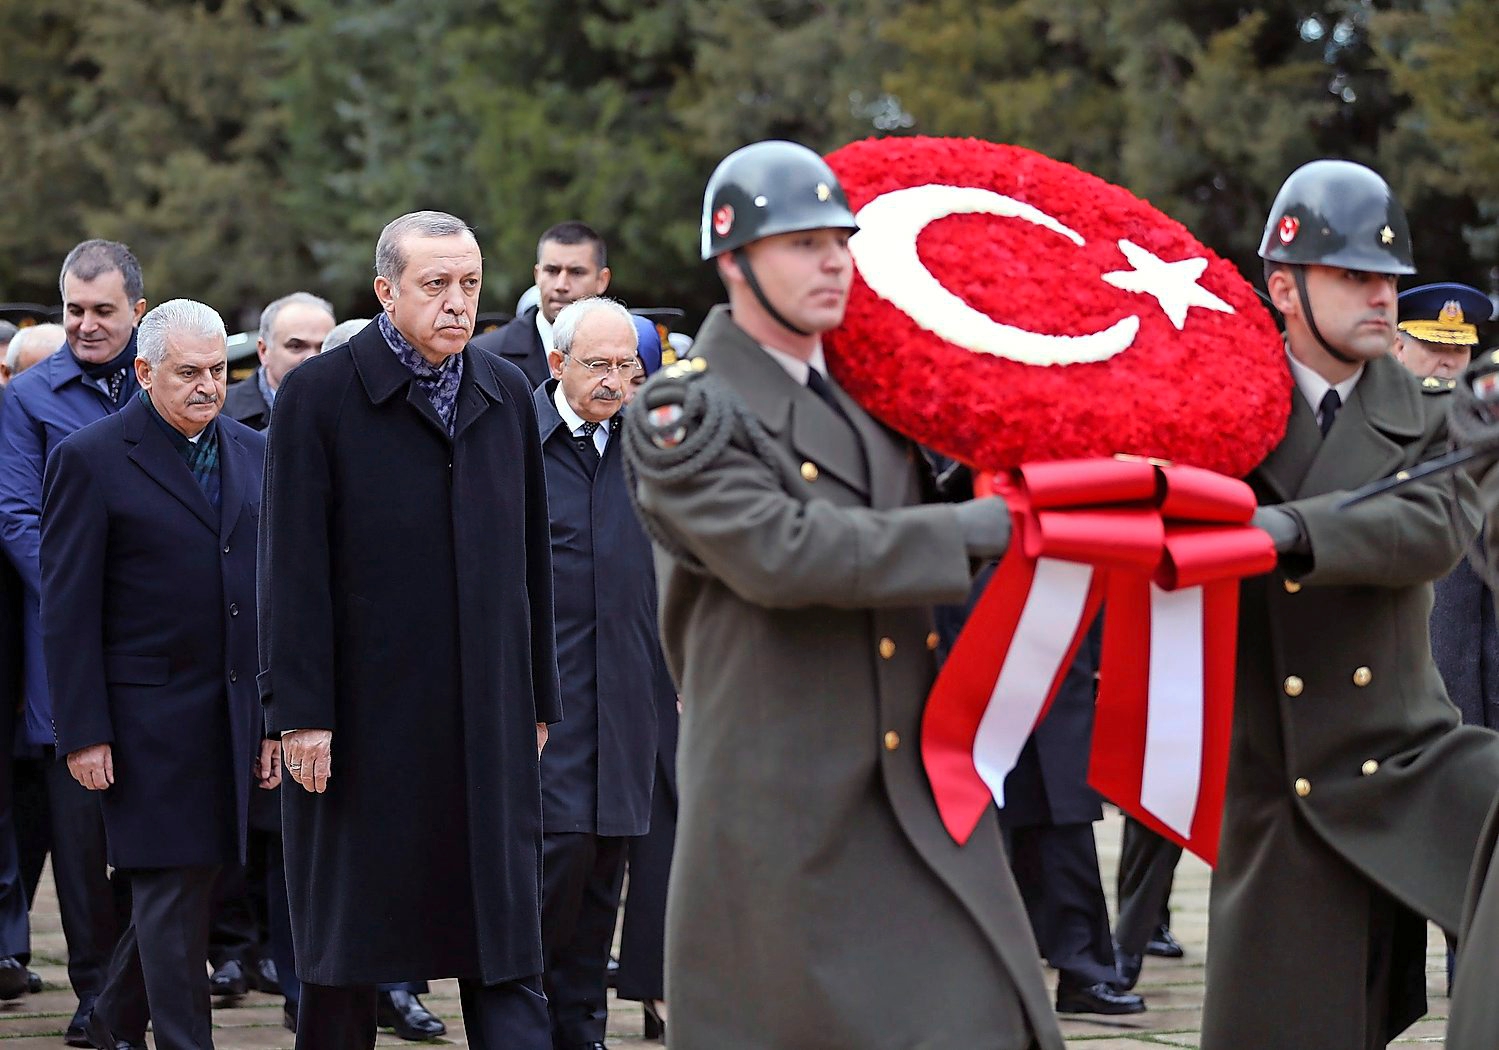 epa05625314 A handout picture provided by Turkish President press office shows Turkish President Recep Tayyip Erdogan (L-back) and Turkish Prime Minister Binali Yildirim (L-1-back) visit the Mausoleum of Mustafa Kemal Ataturk, during a ceremony marking the 78th death anniversary of Mustafa Kemal Ataturk at the mausoleum dedidacted to his memory in Ankara, Turkey, 10 November 2016.  EPA/TURKISH PRESIDENT PRESS OFFICE / HANDOUT  HANDOUT EDITORIAL USE ONLY/NO SALES TURKEY ATATURK DEATH ANNIVERSARY